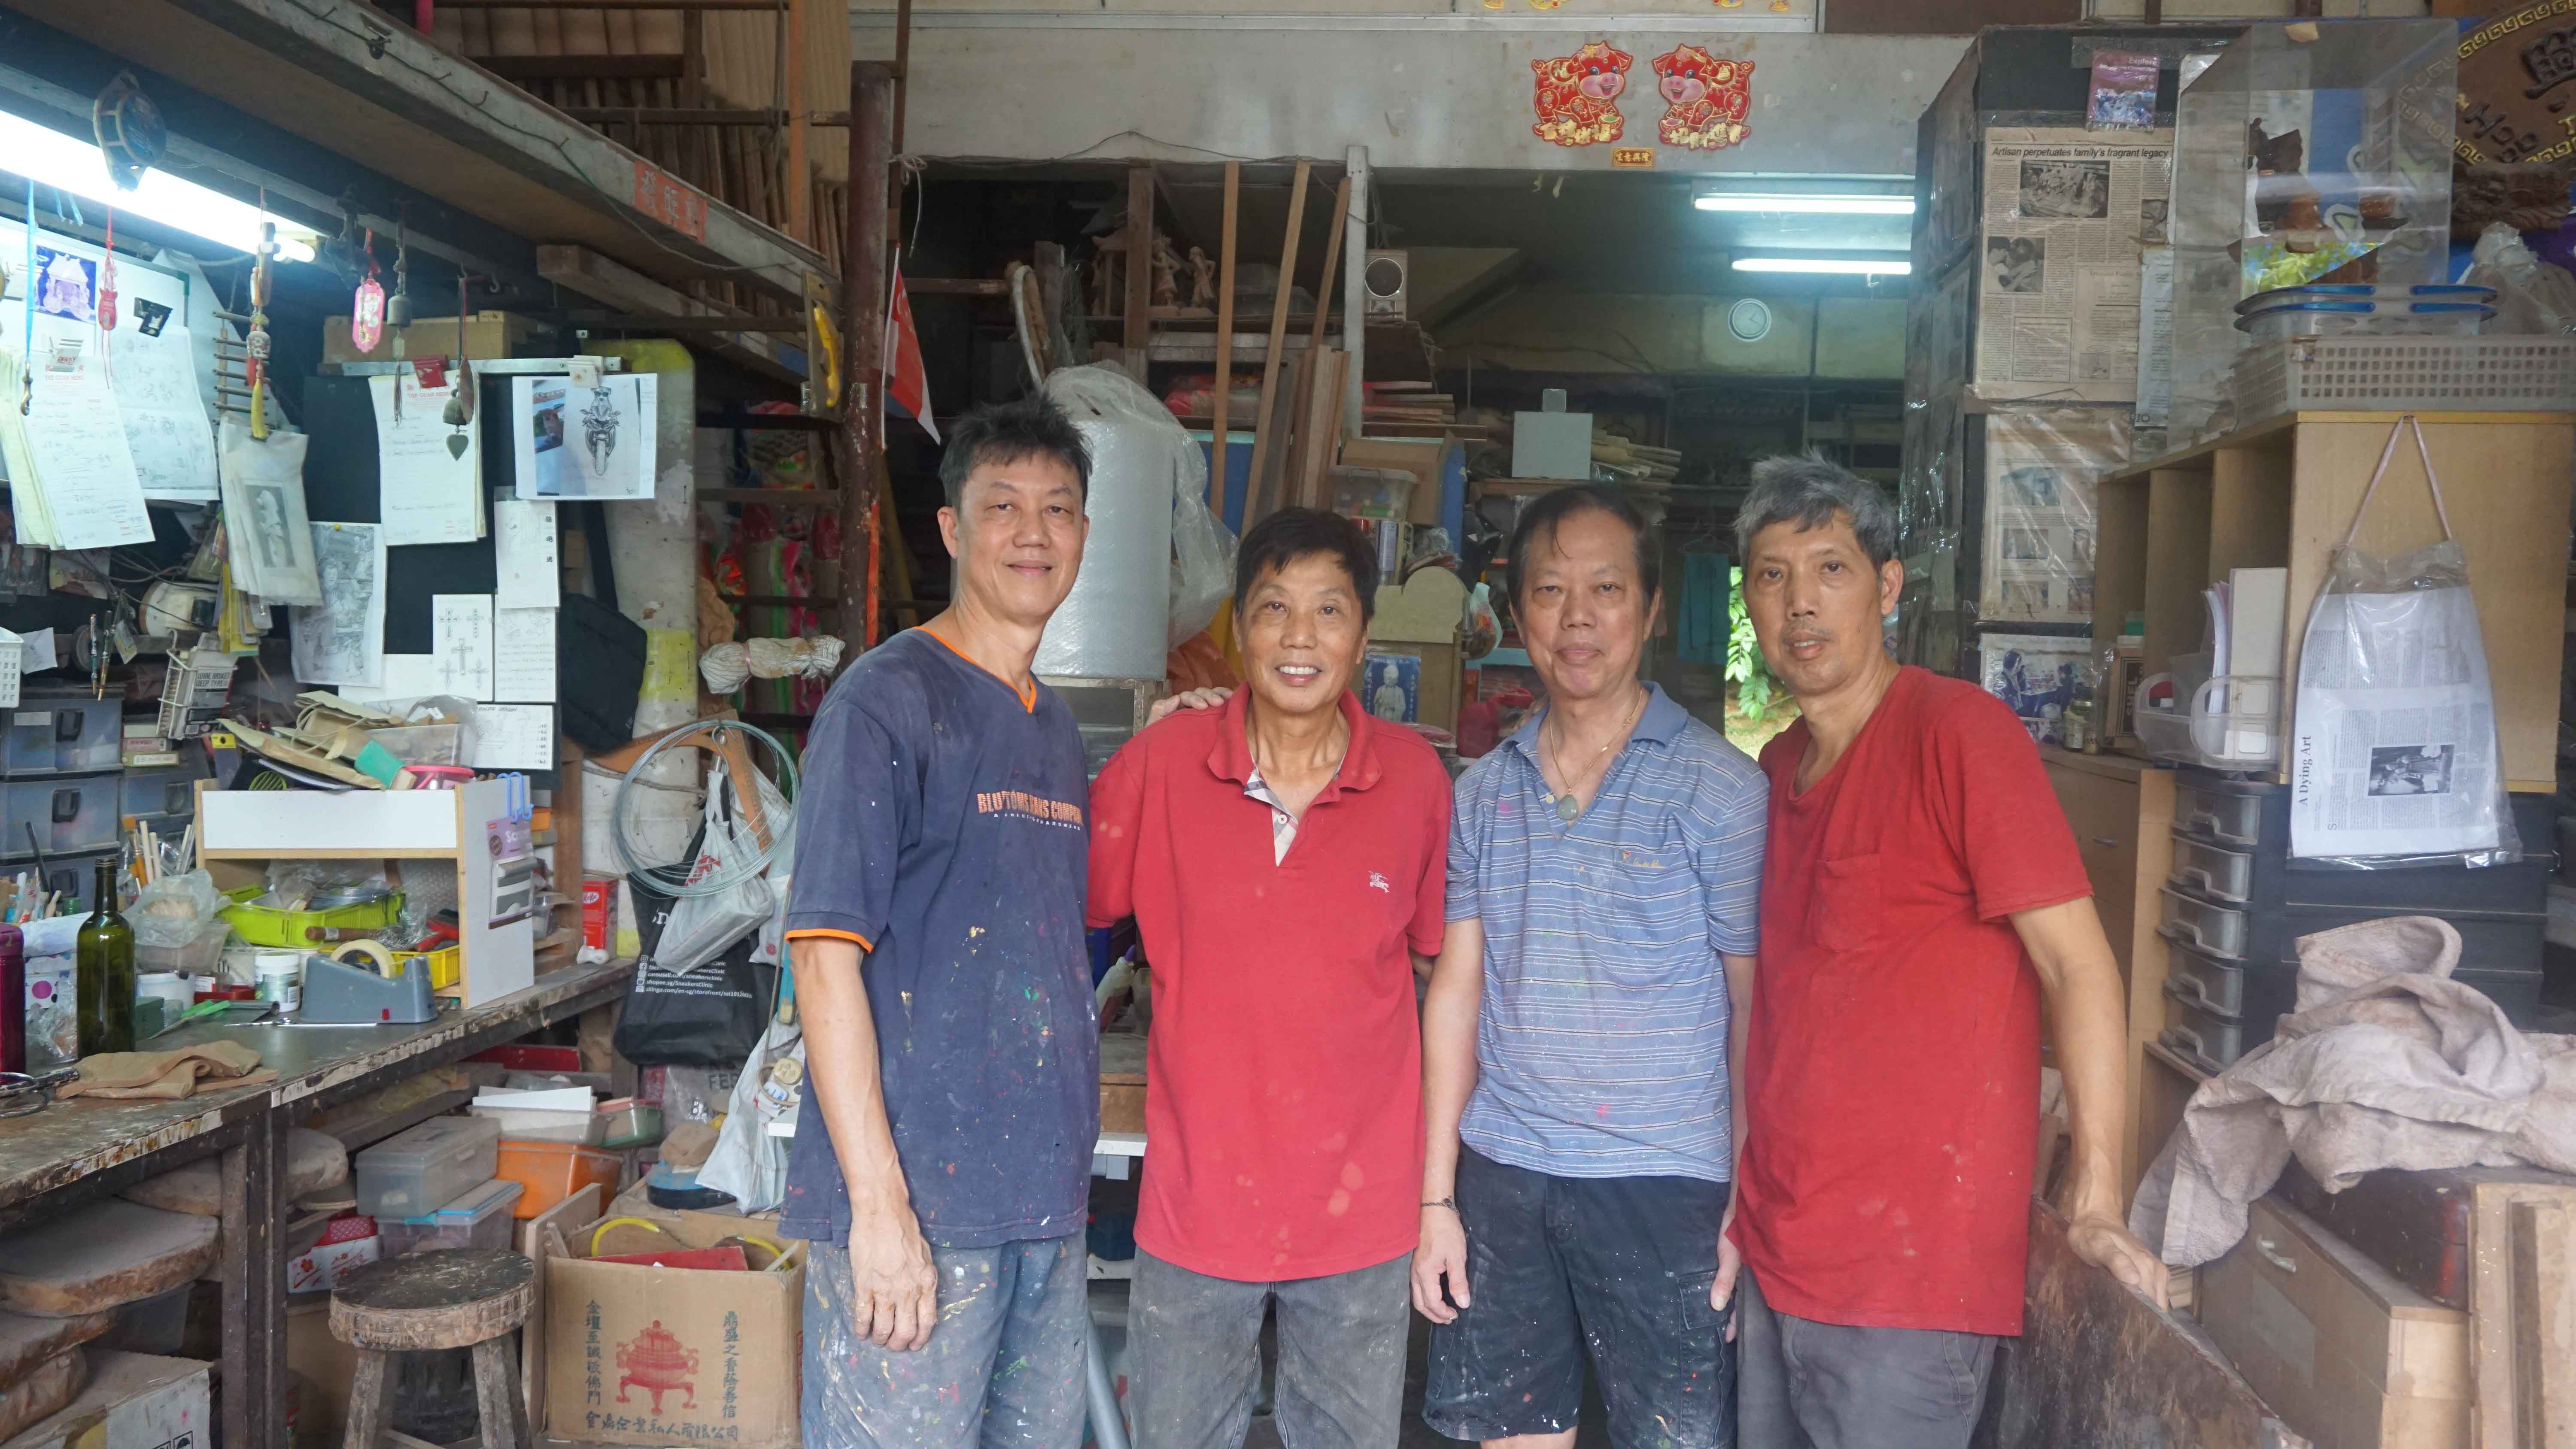 Mr Amos Tay (rightmost) with the Tay brothers, who help out at the store.